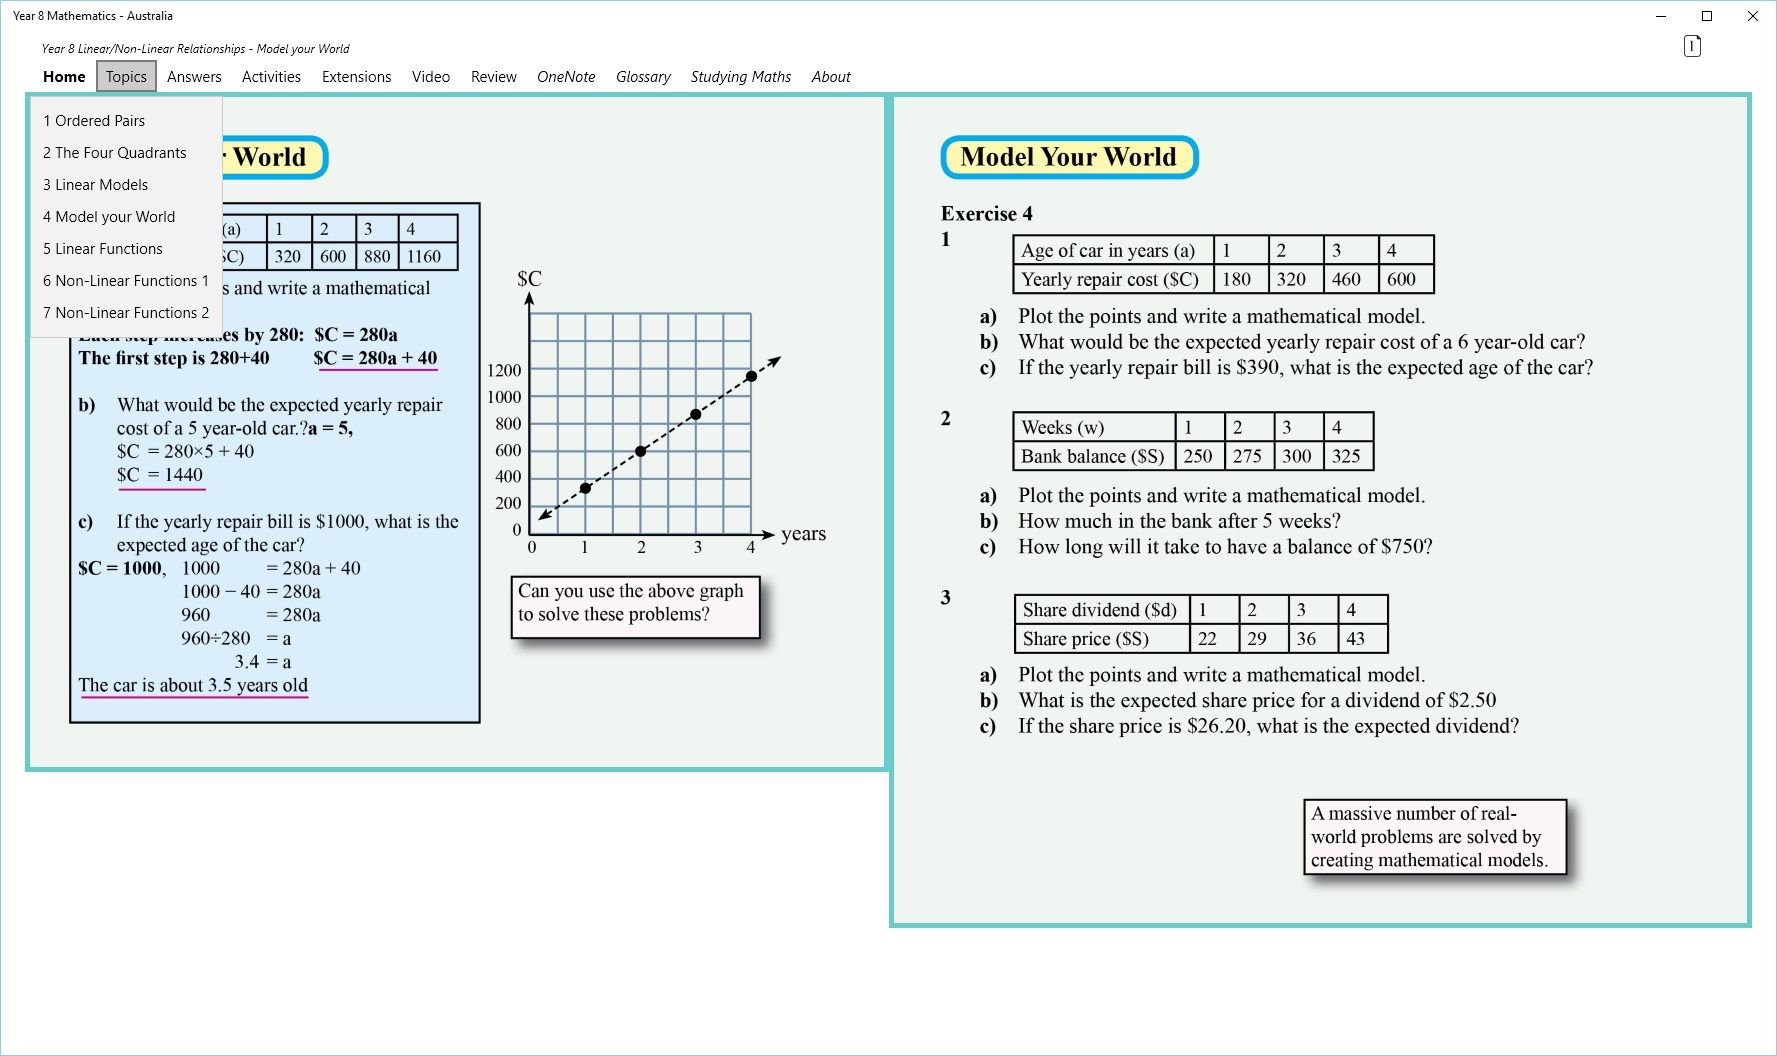 A drop down menu on the left showing topic choice within the linear/non-linear relationships module